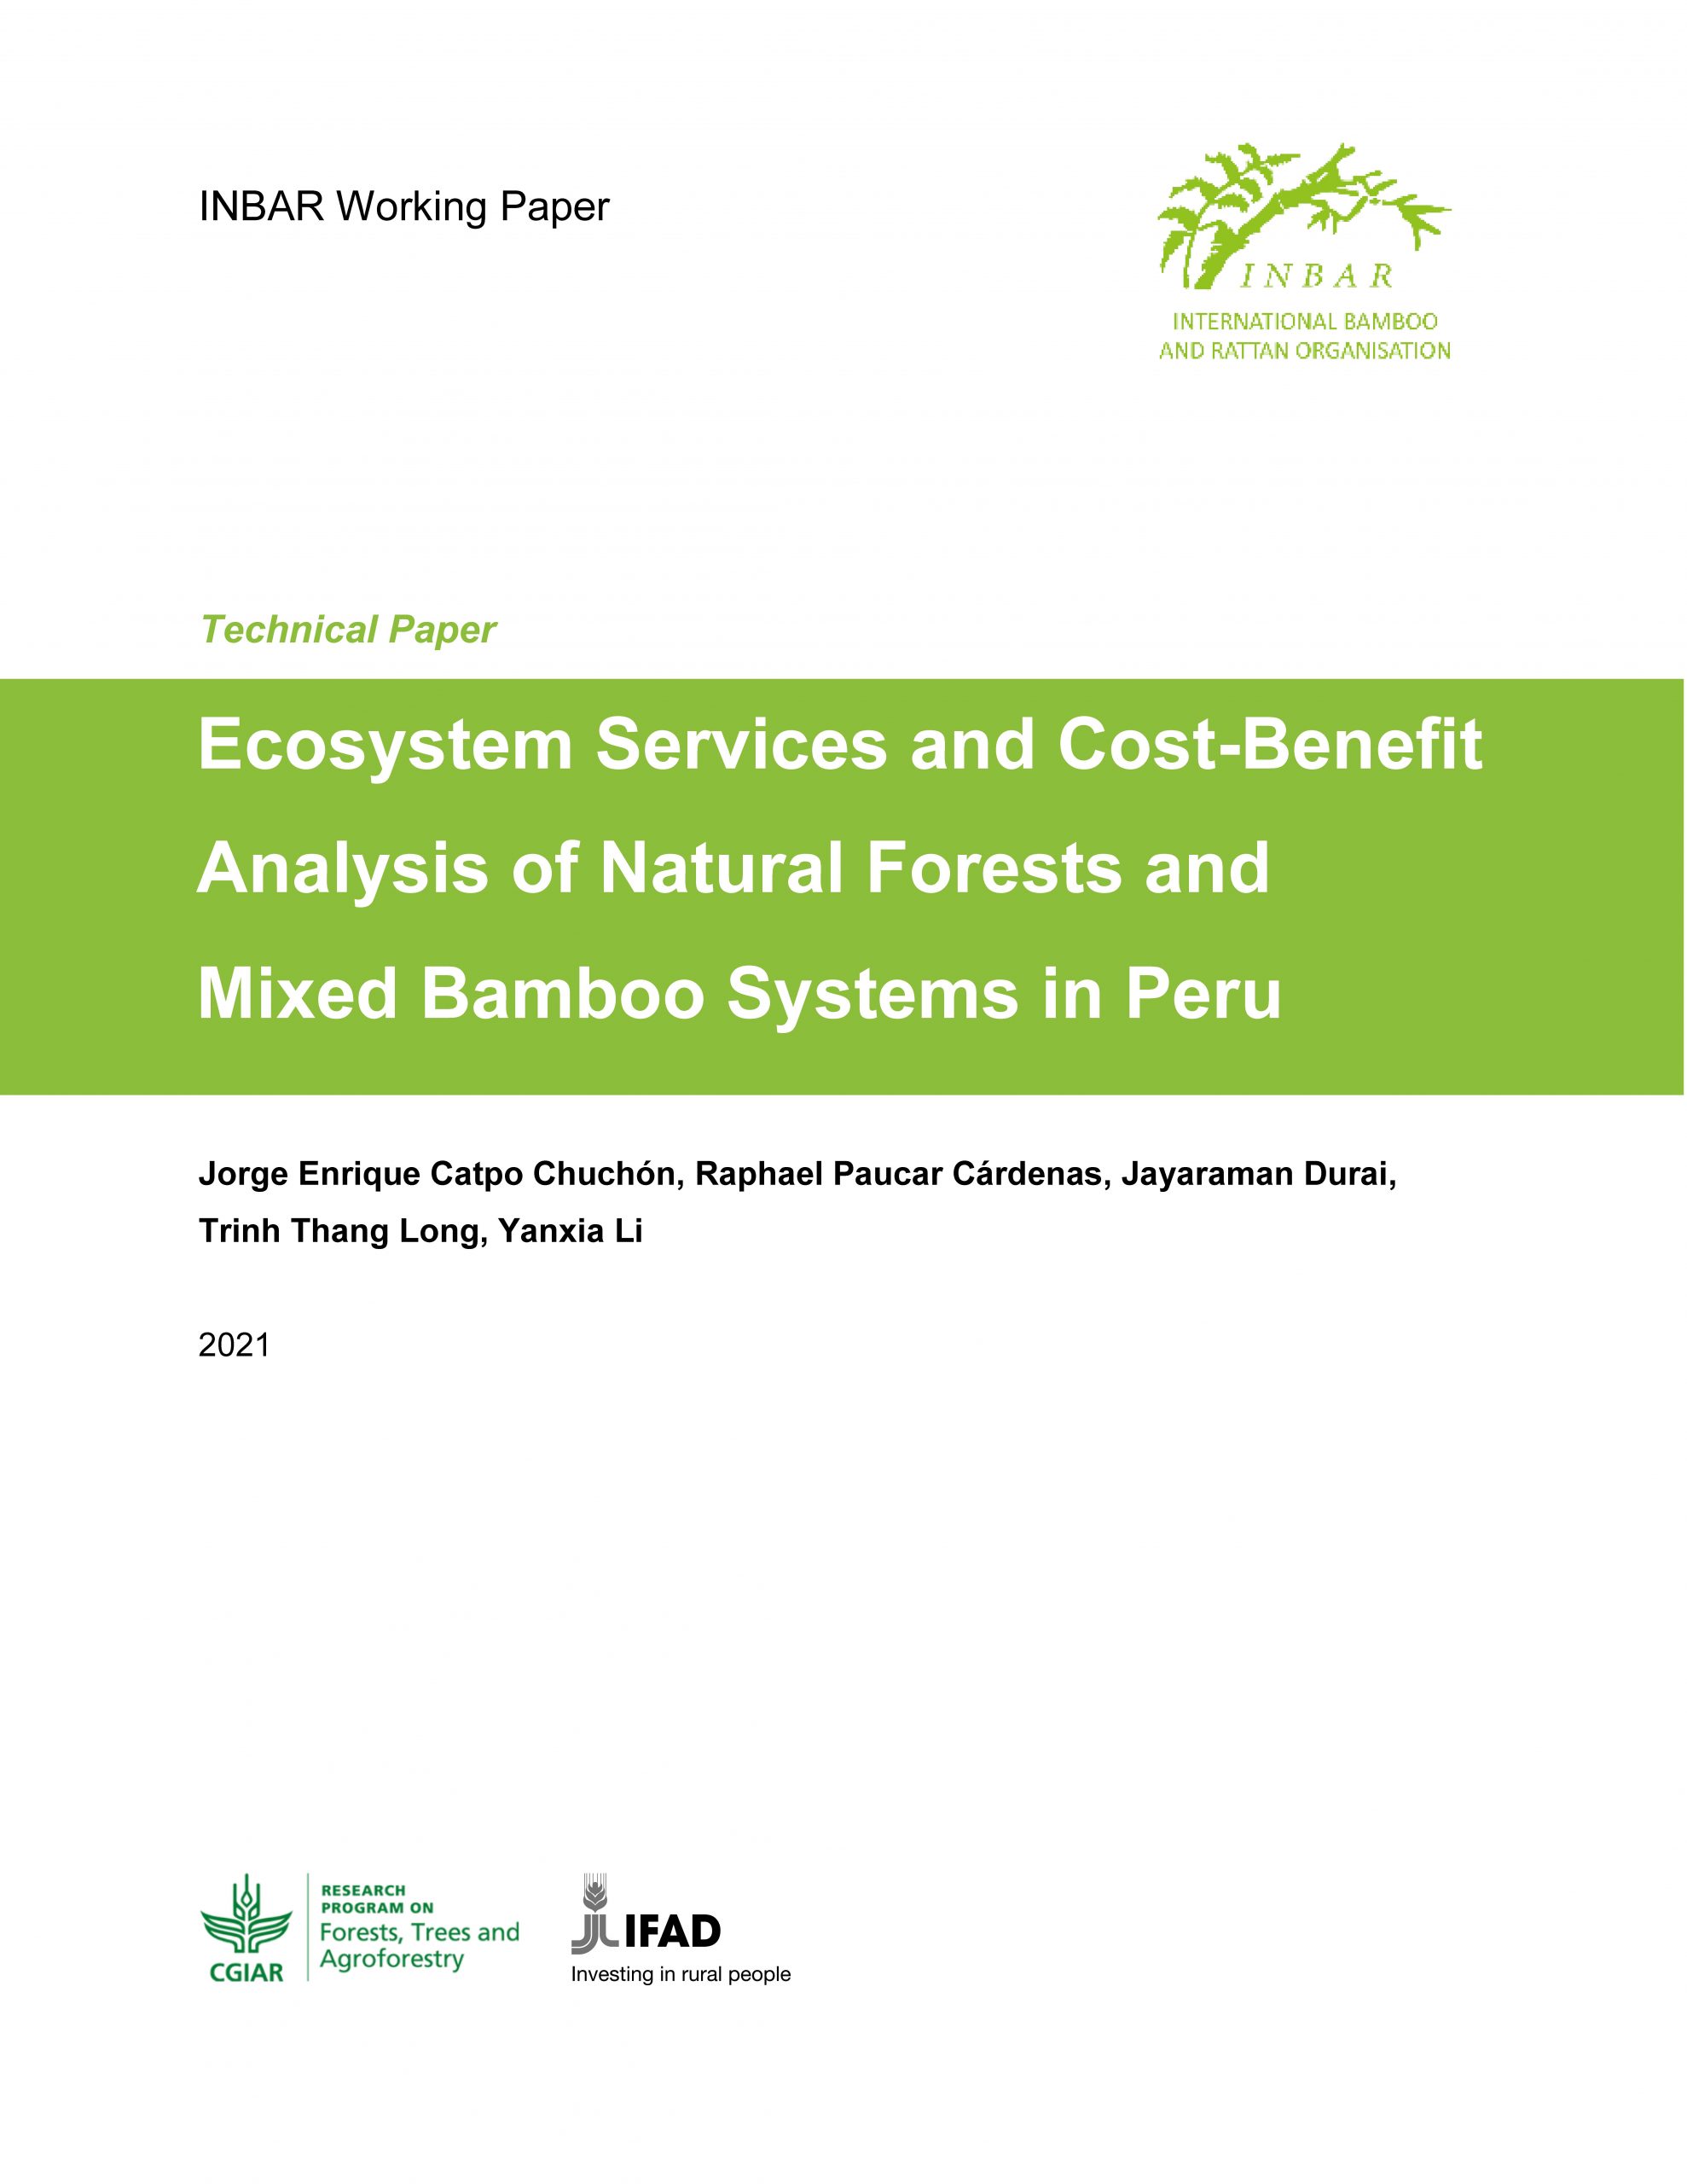 Ecosystem Services and Cost-Benefit Analysis of Natural Forests and Mixed Bamboo Systems in Peru